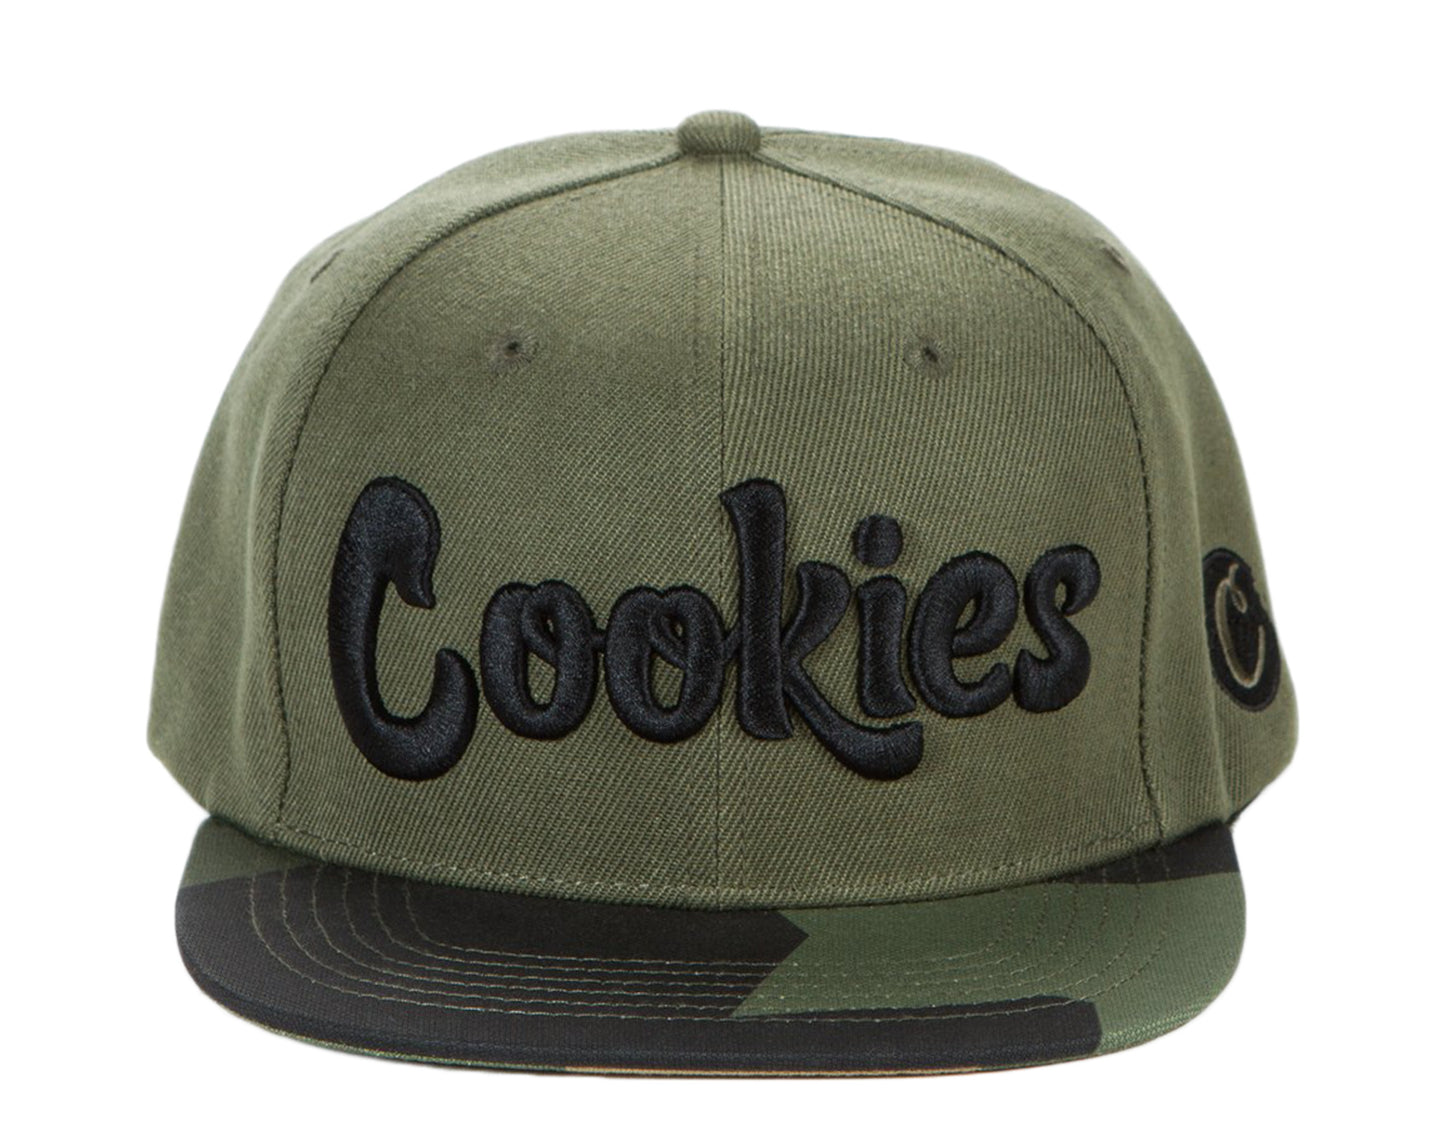 Cookies Botanical Twill Two-Tone Olive/Green Camo Snapback Hat 1545X4100-OLC